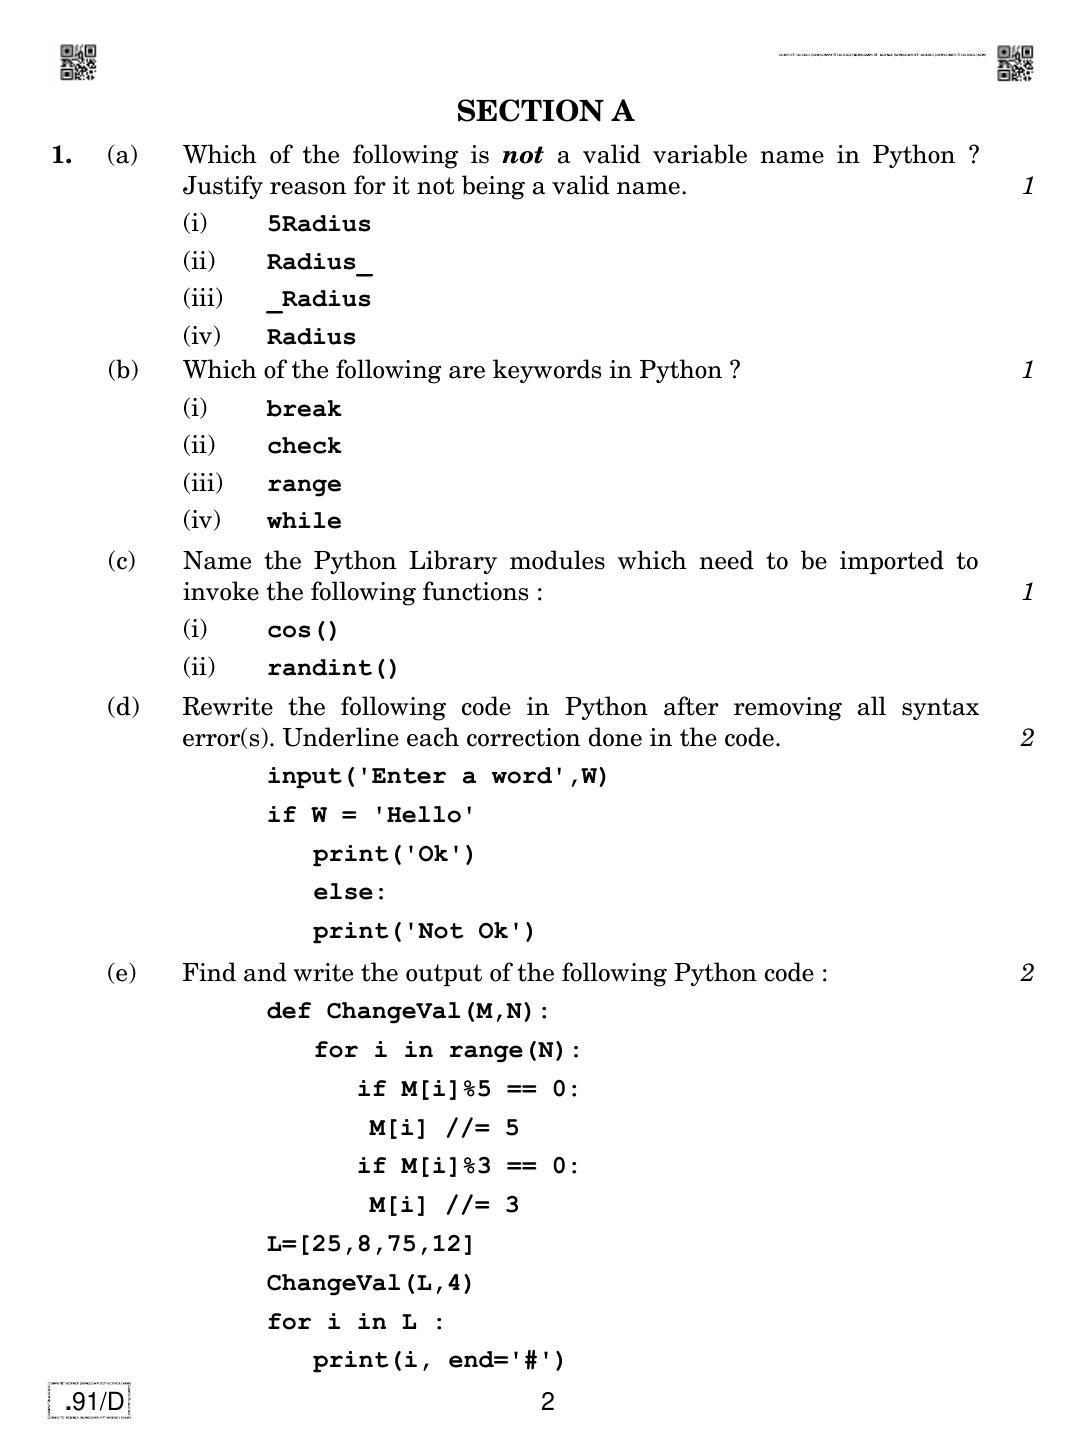 CBSE Class 12 CS 2020 Compartment Question Paper - Page 2